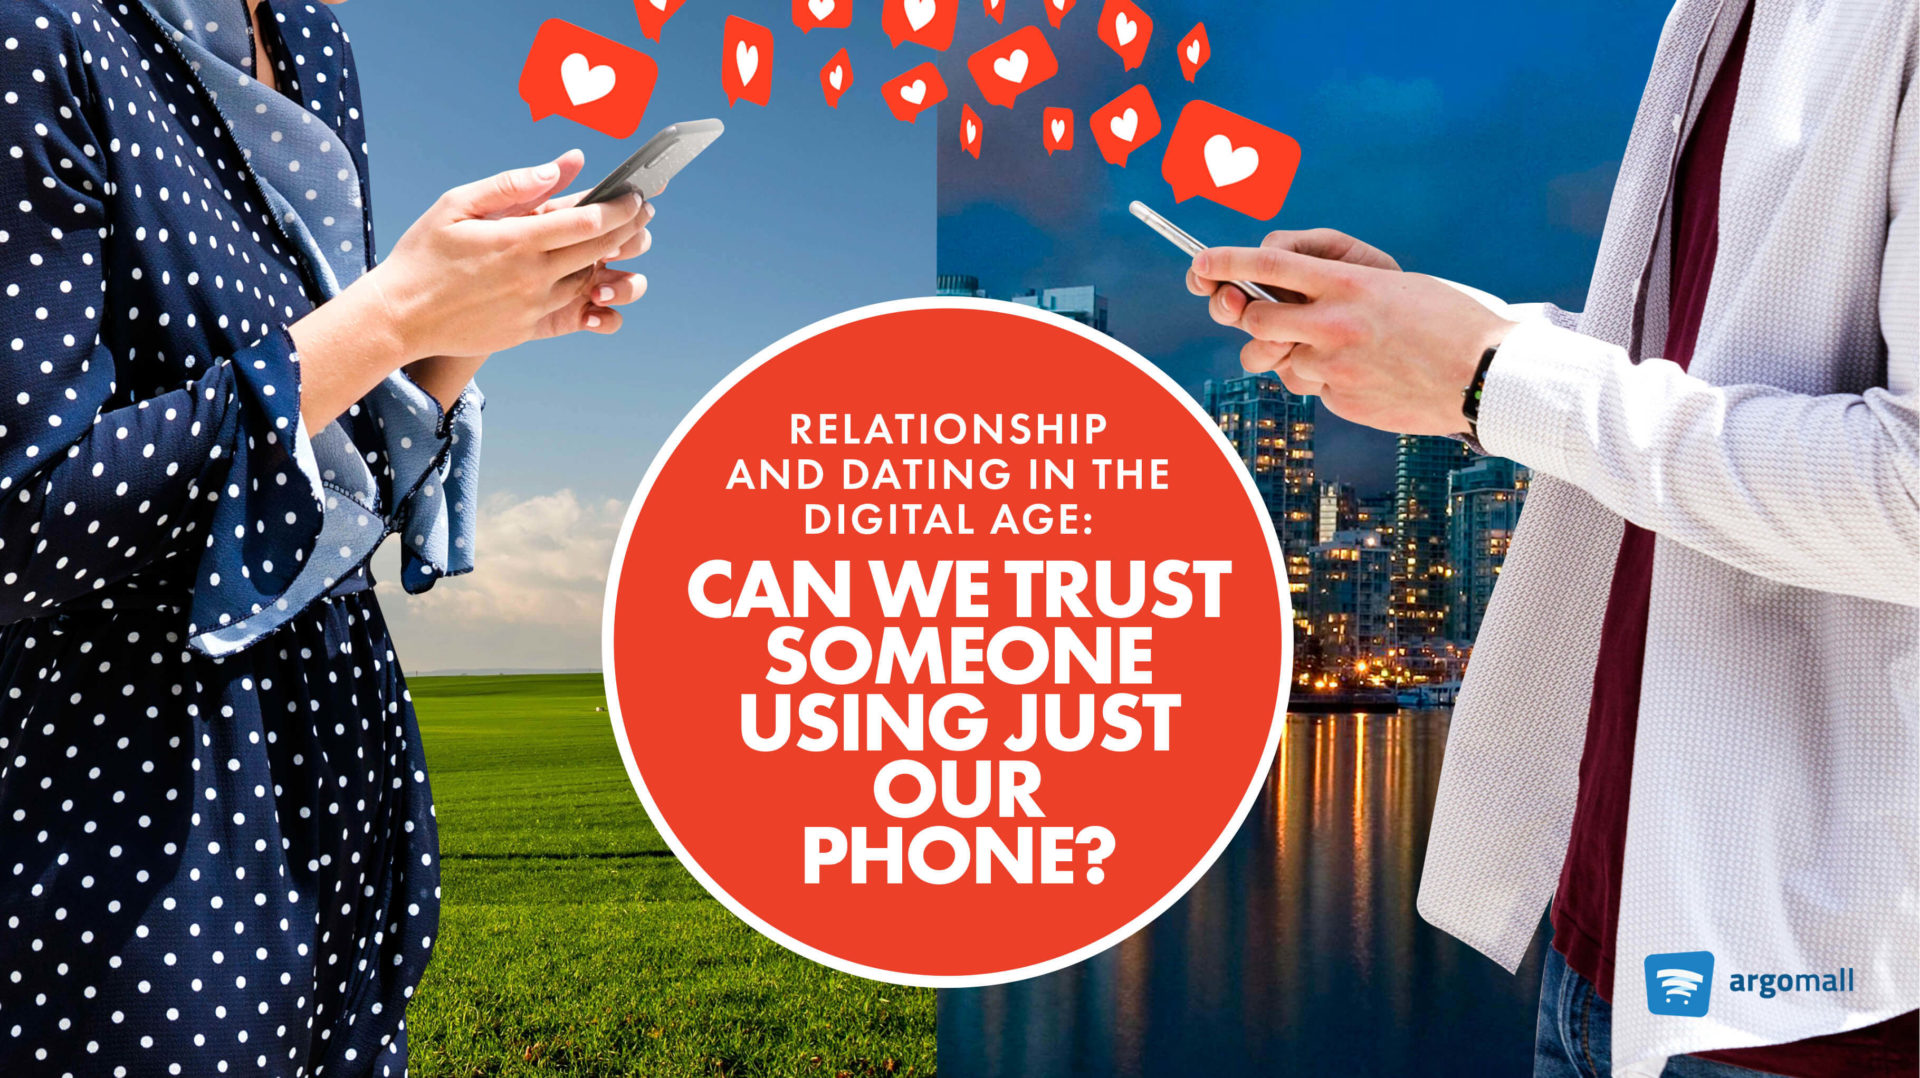 Relationships in the Digital Age: Can Genuine Trust be Built Through Phones?